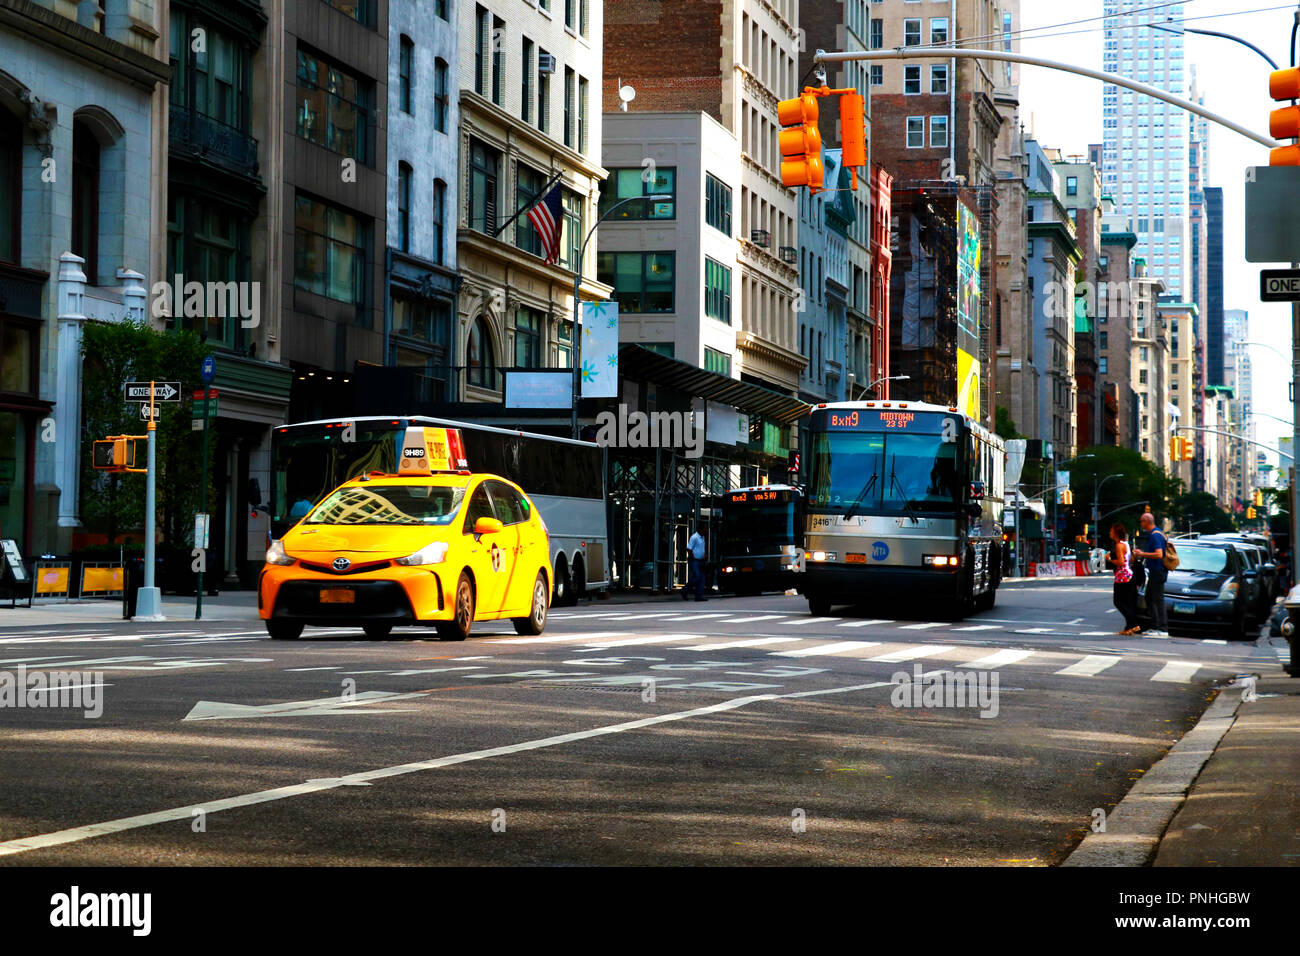 New York street scene with yellow taxi and people in Manhattan Stock Photo